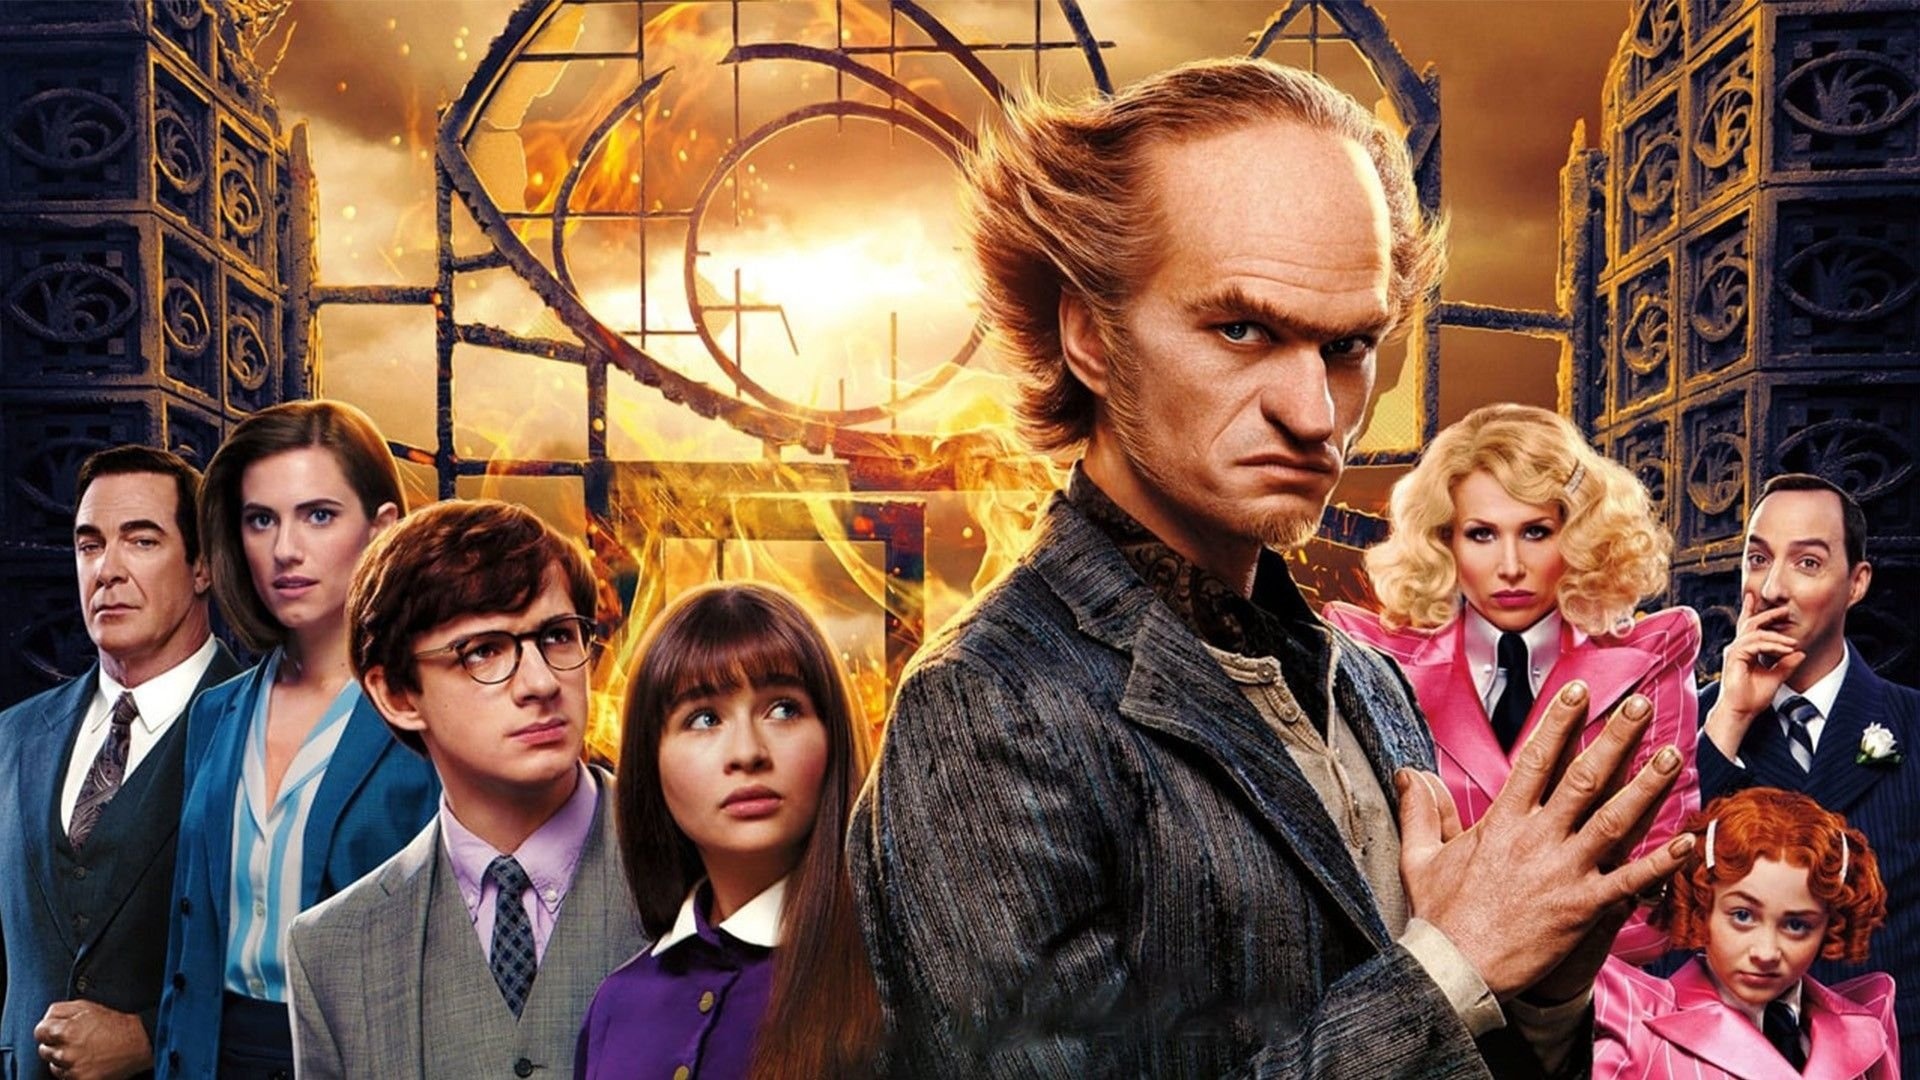 A Series of Unfortunate Events, HD wallpapers, Enigmatic imagery, Unlucky background, 1920x1080 Full HD Desktop